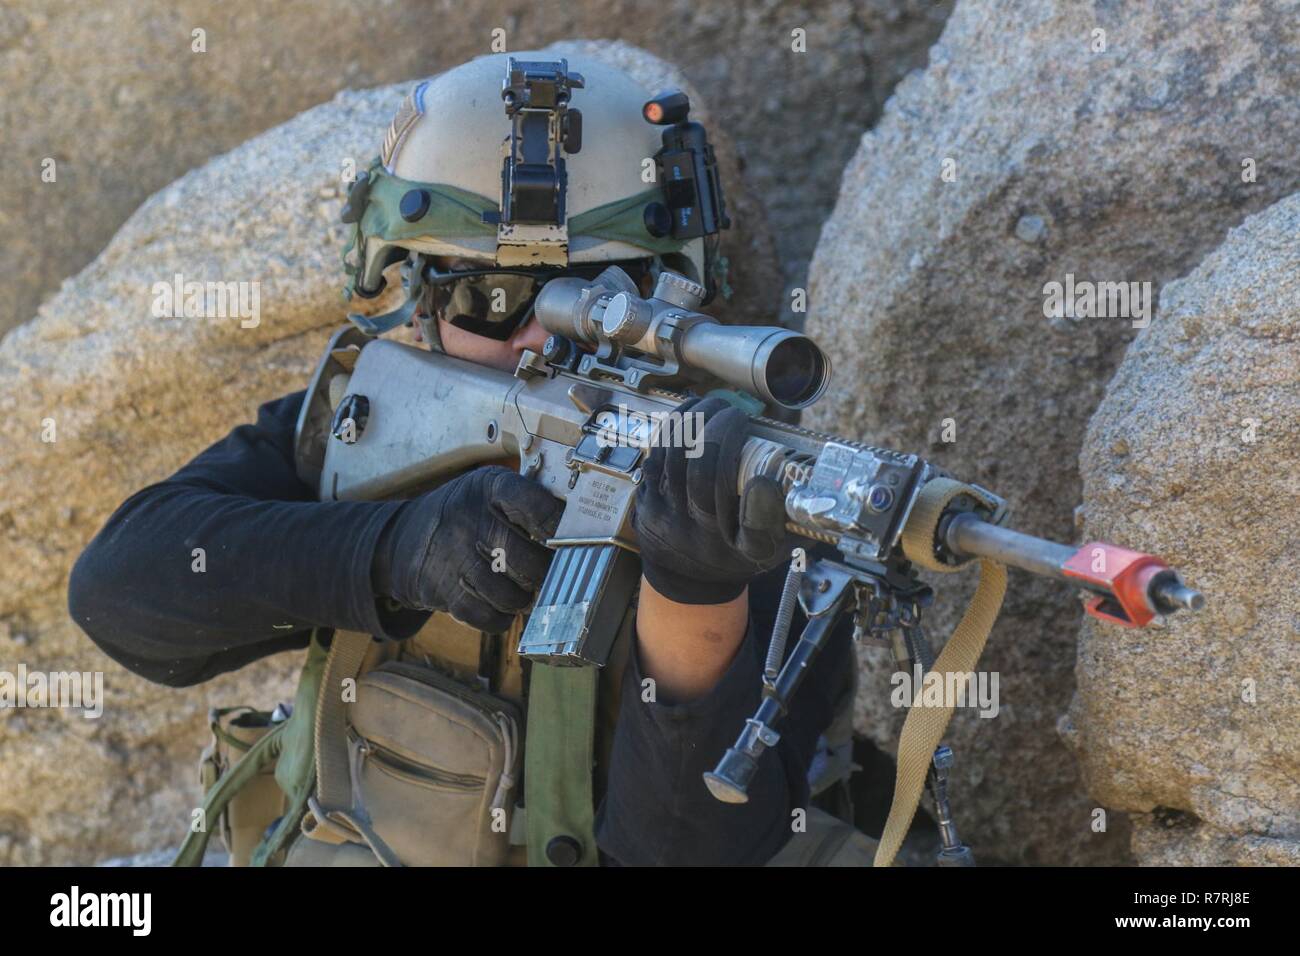 FORT IRWIN, Calif. – A Soldier from Coldsteel Troop, 1st Squadron, 11th Armored Cavalry Regiment, portraying a Bilausavar Freedom Brigade sniper, targets elements of the 1st Armored Brigade Combat Team, 3rd Infantry Division, during their assault on the city of Razish in the National Training Center, April 4, 2017. This phase of NTC Rotation 17-05 tested the “Raiders” Brigade’s ability to seize and capture an urban objective. Stock Photo